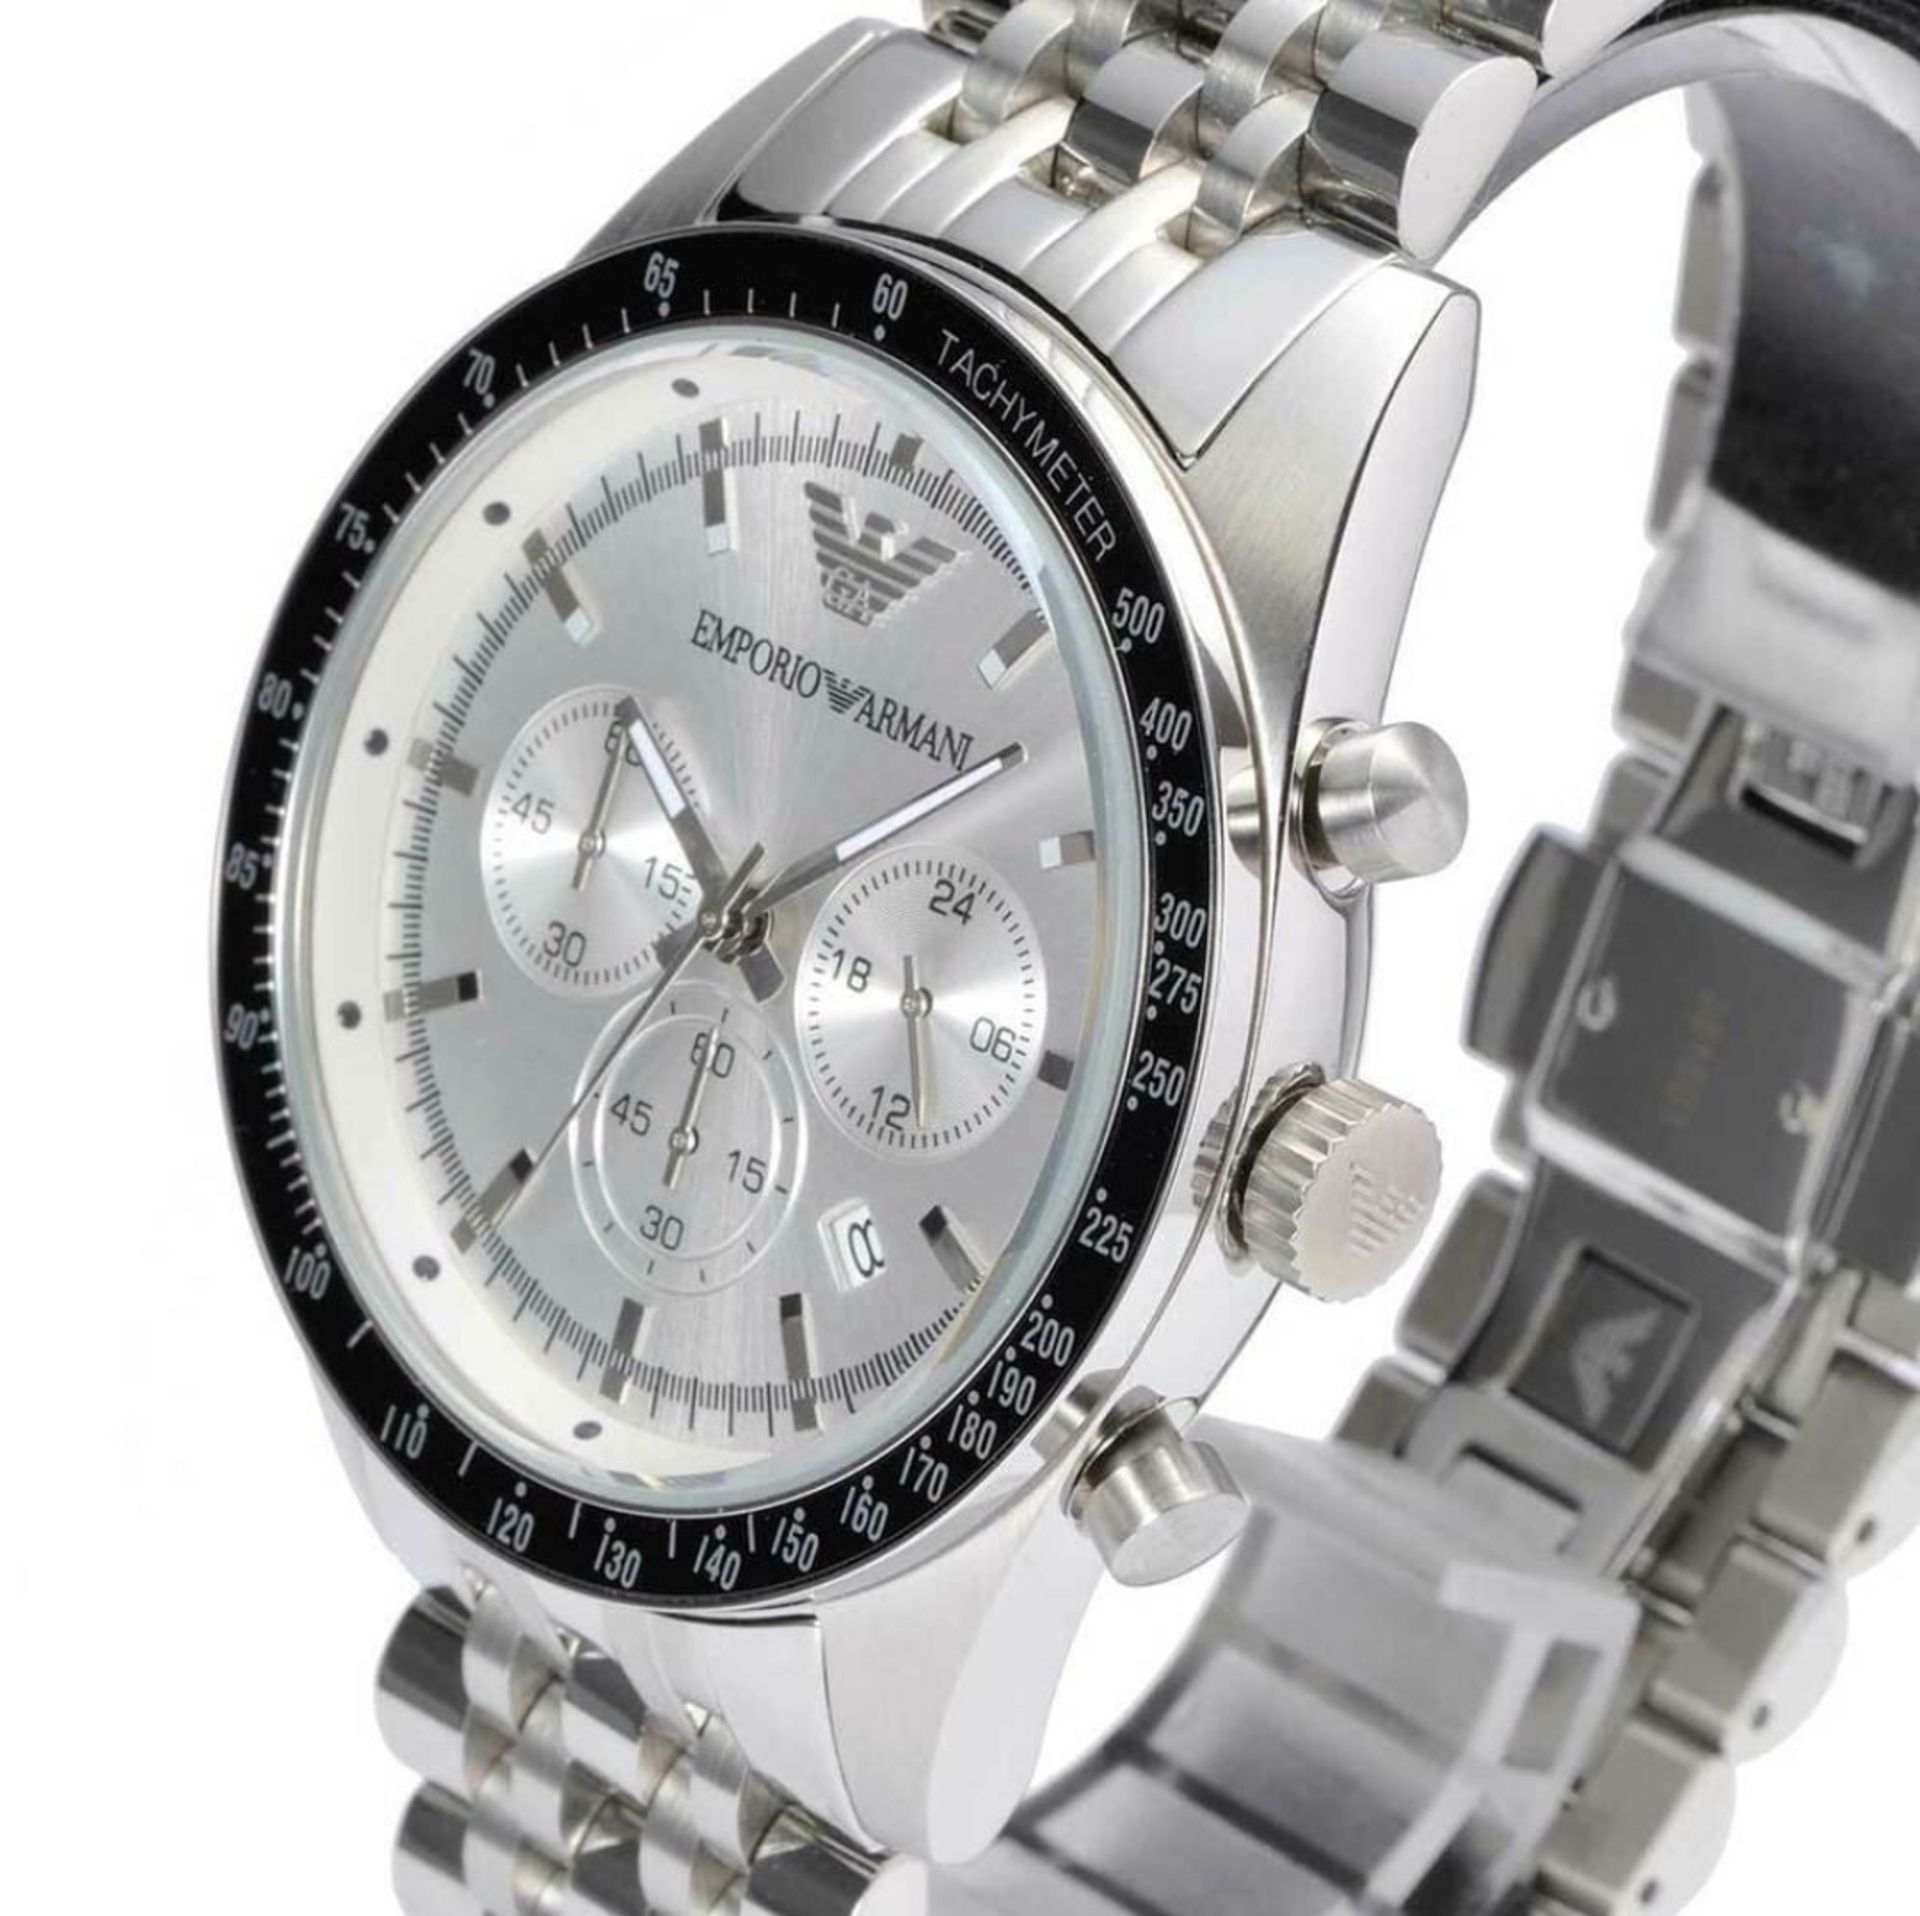 AR6073 Emporio Armani Men's Sportivo Silver Stainless Steel Chronograph Watch - Image 3 of 8